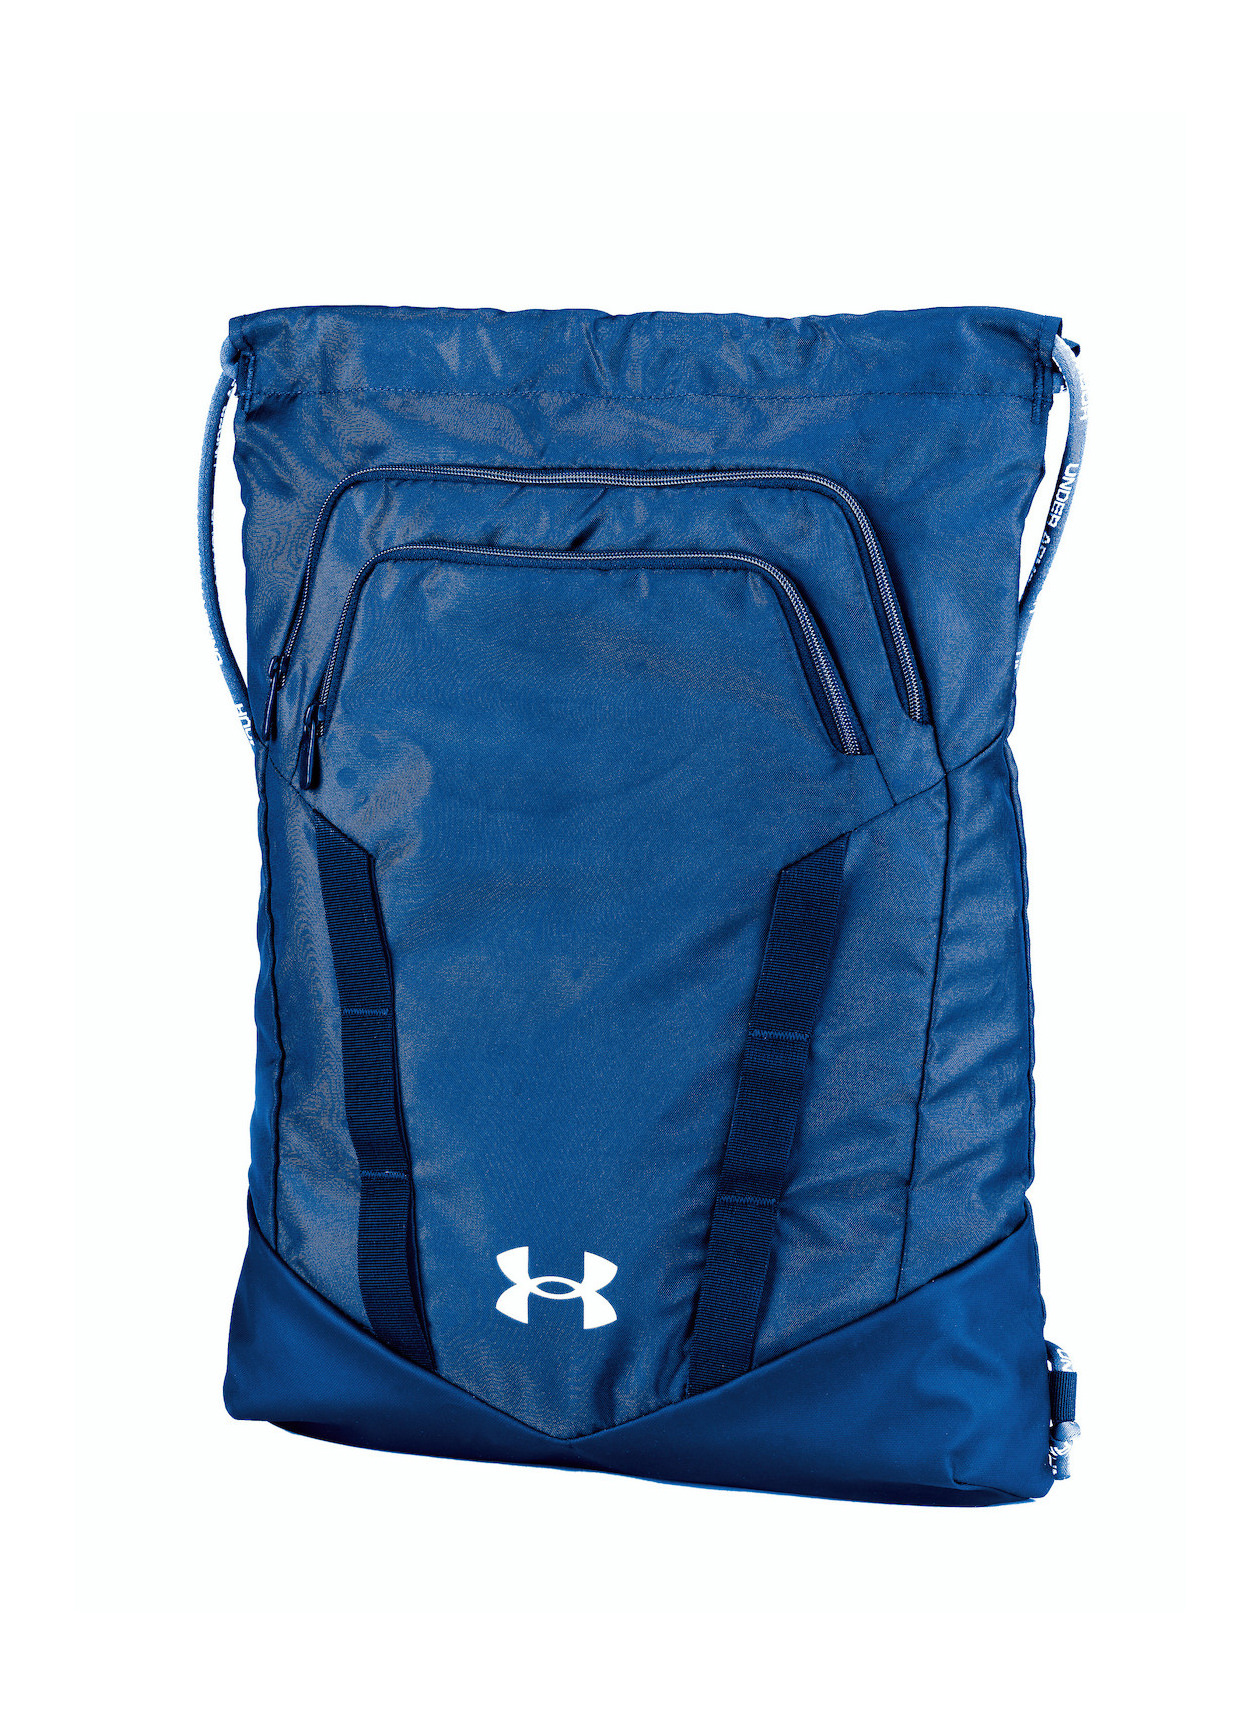 Under Armour Royal Blue Undeniable Sackpack 2.0